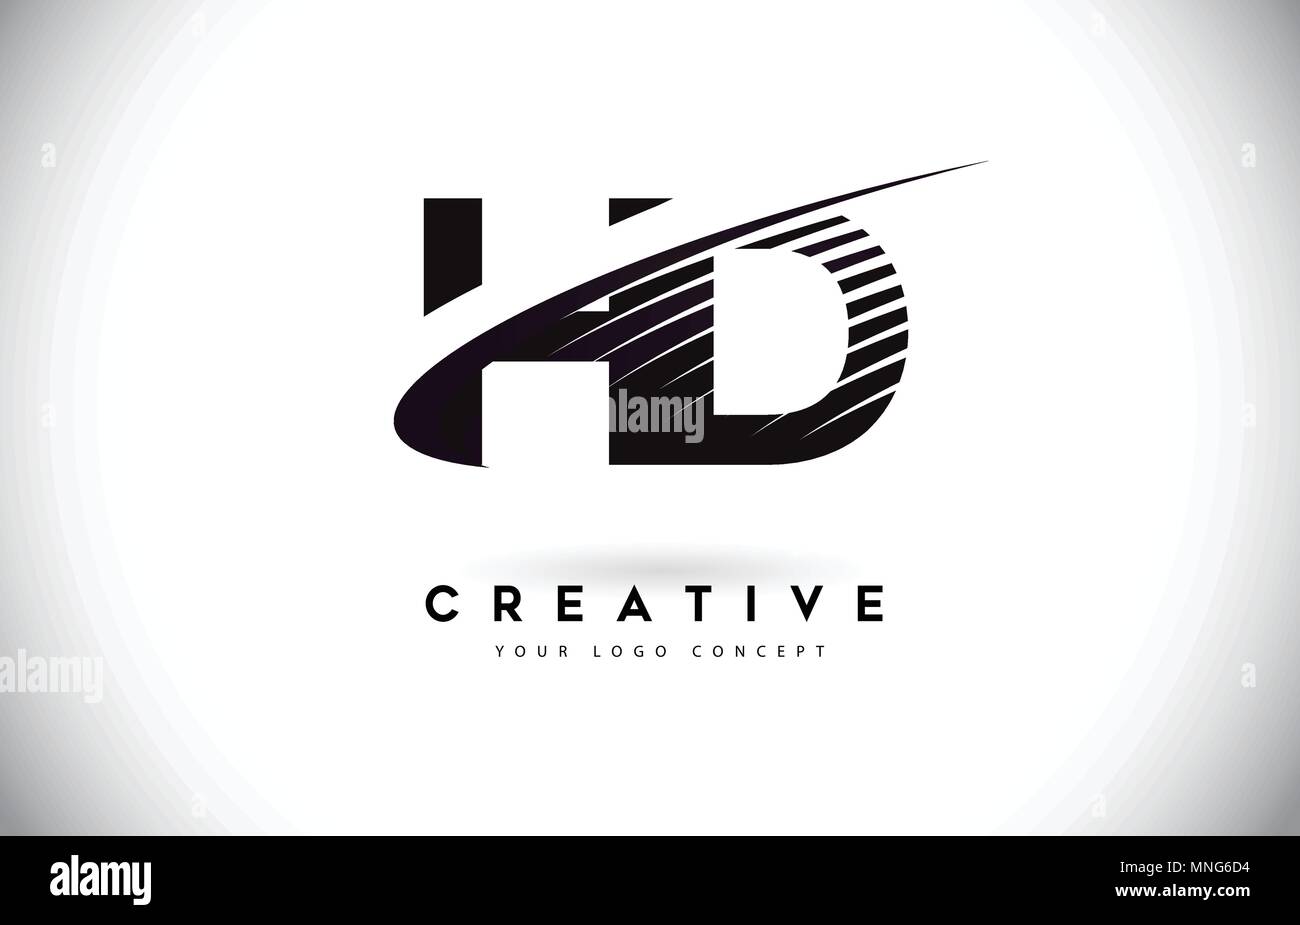 Hd H D Letter Logo Design With Swoosh And Black Lines Modern Creative Zebra Lines Letters Vector Logo Stock Vector Image Art Alamy